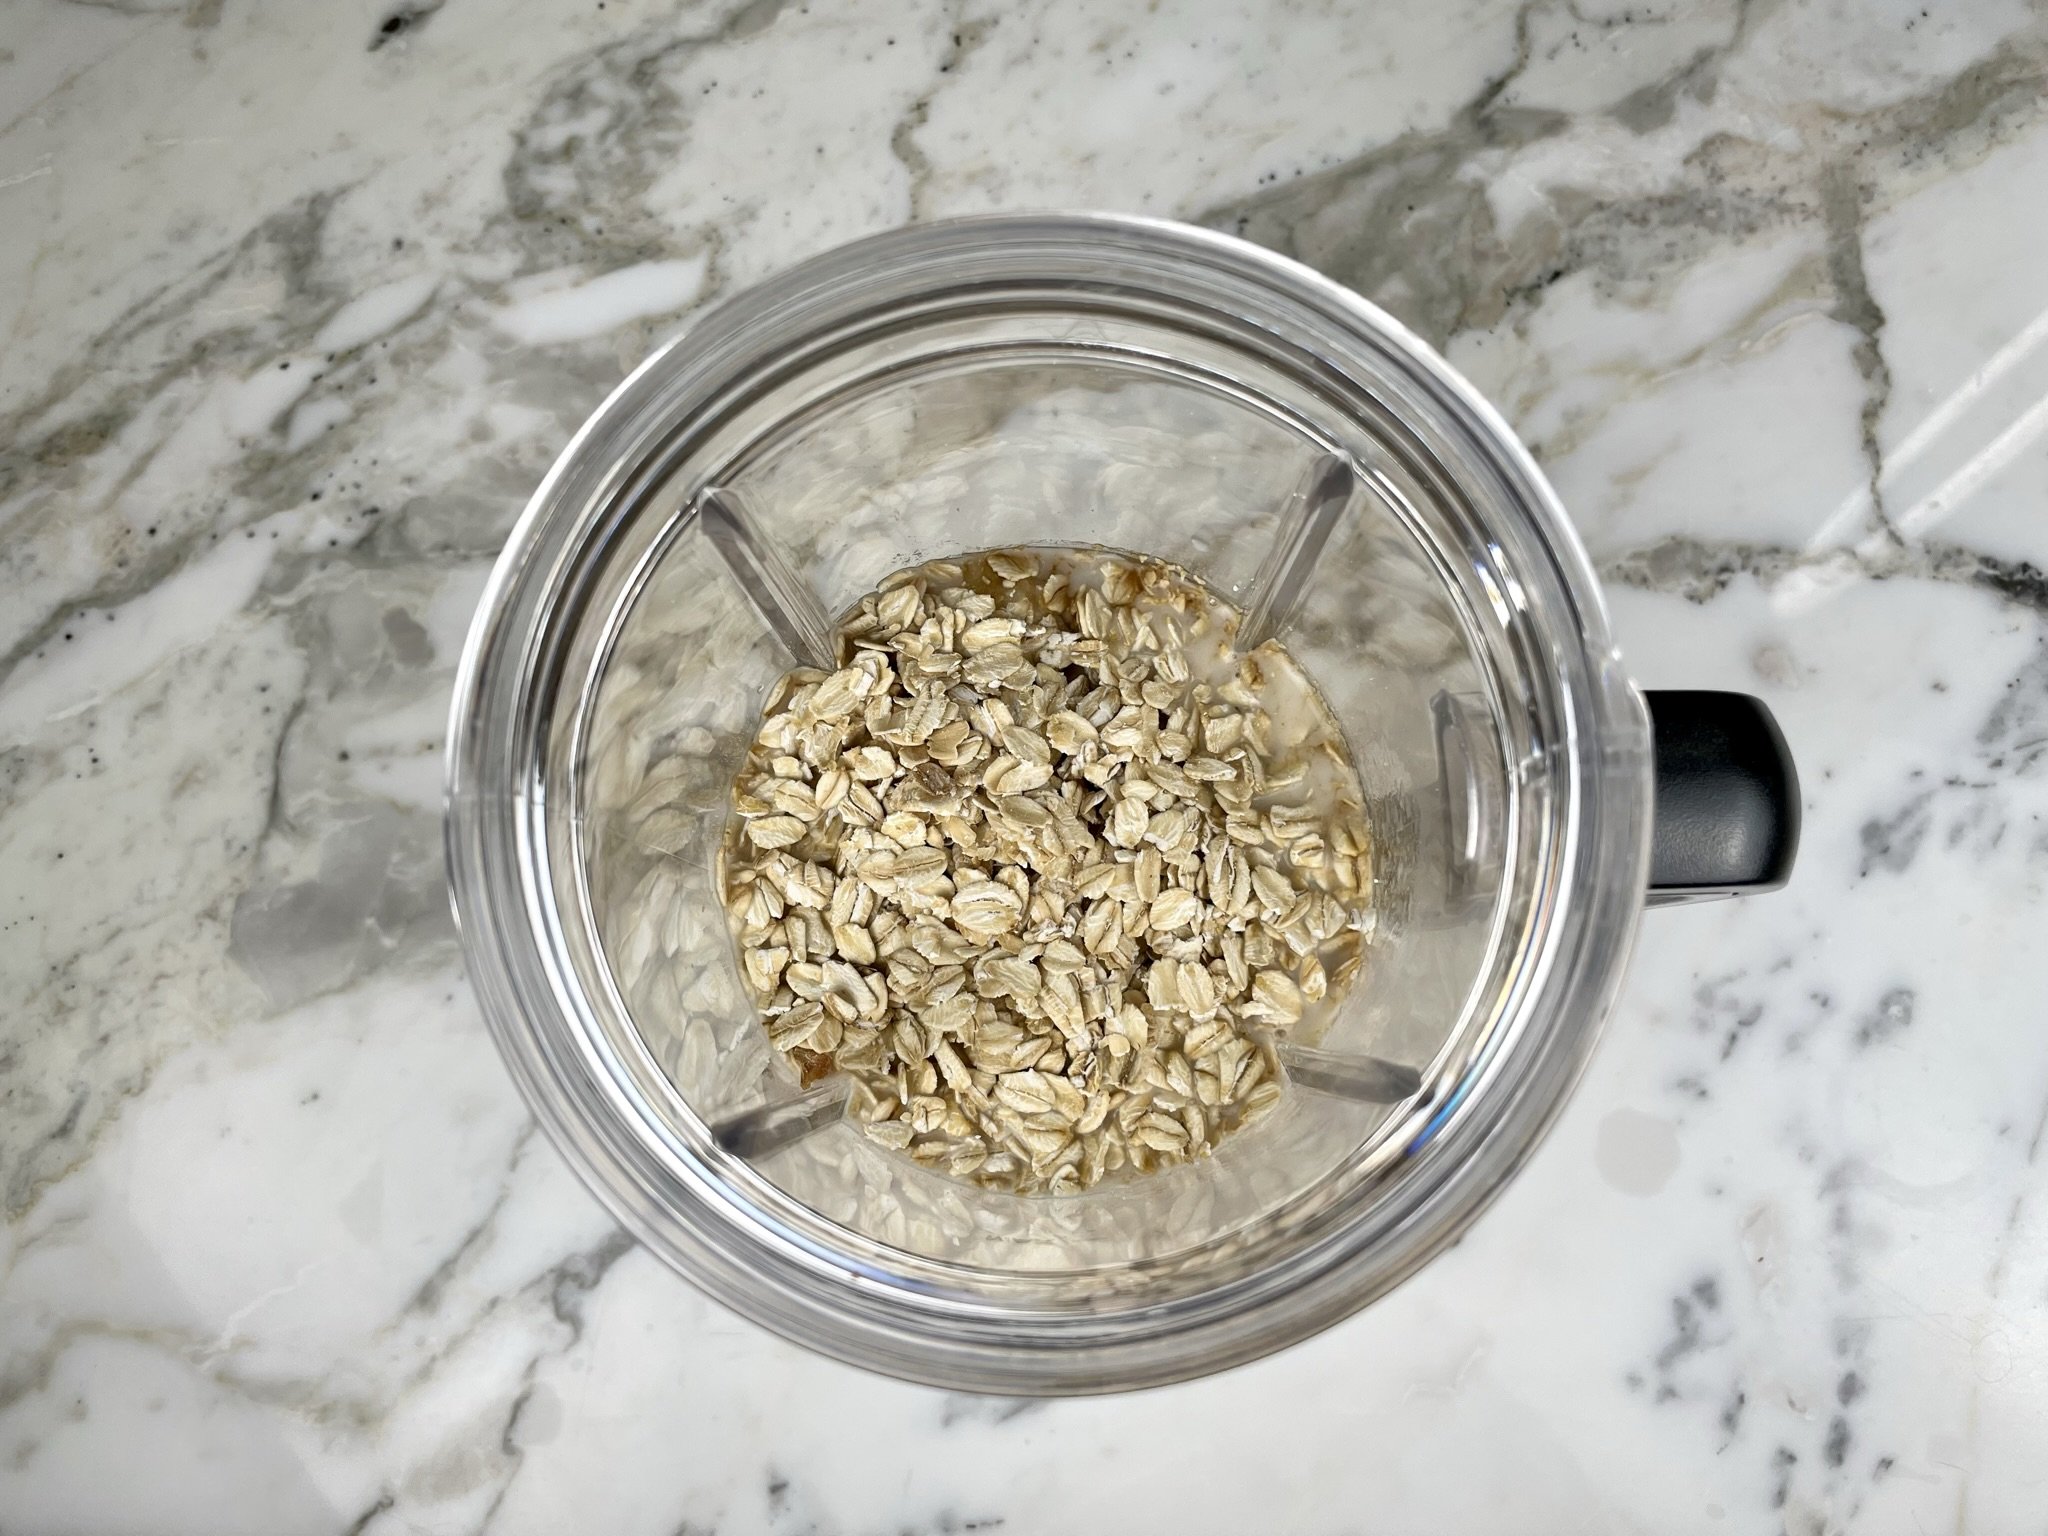 Add only ½ cup oats.